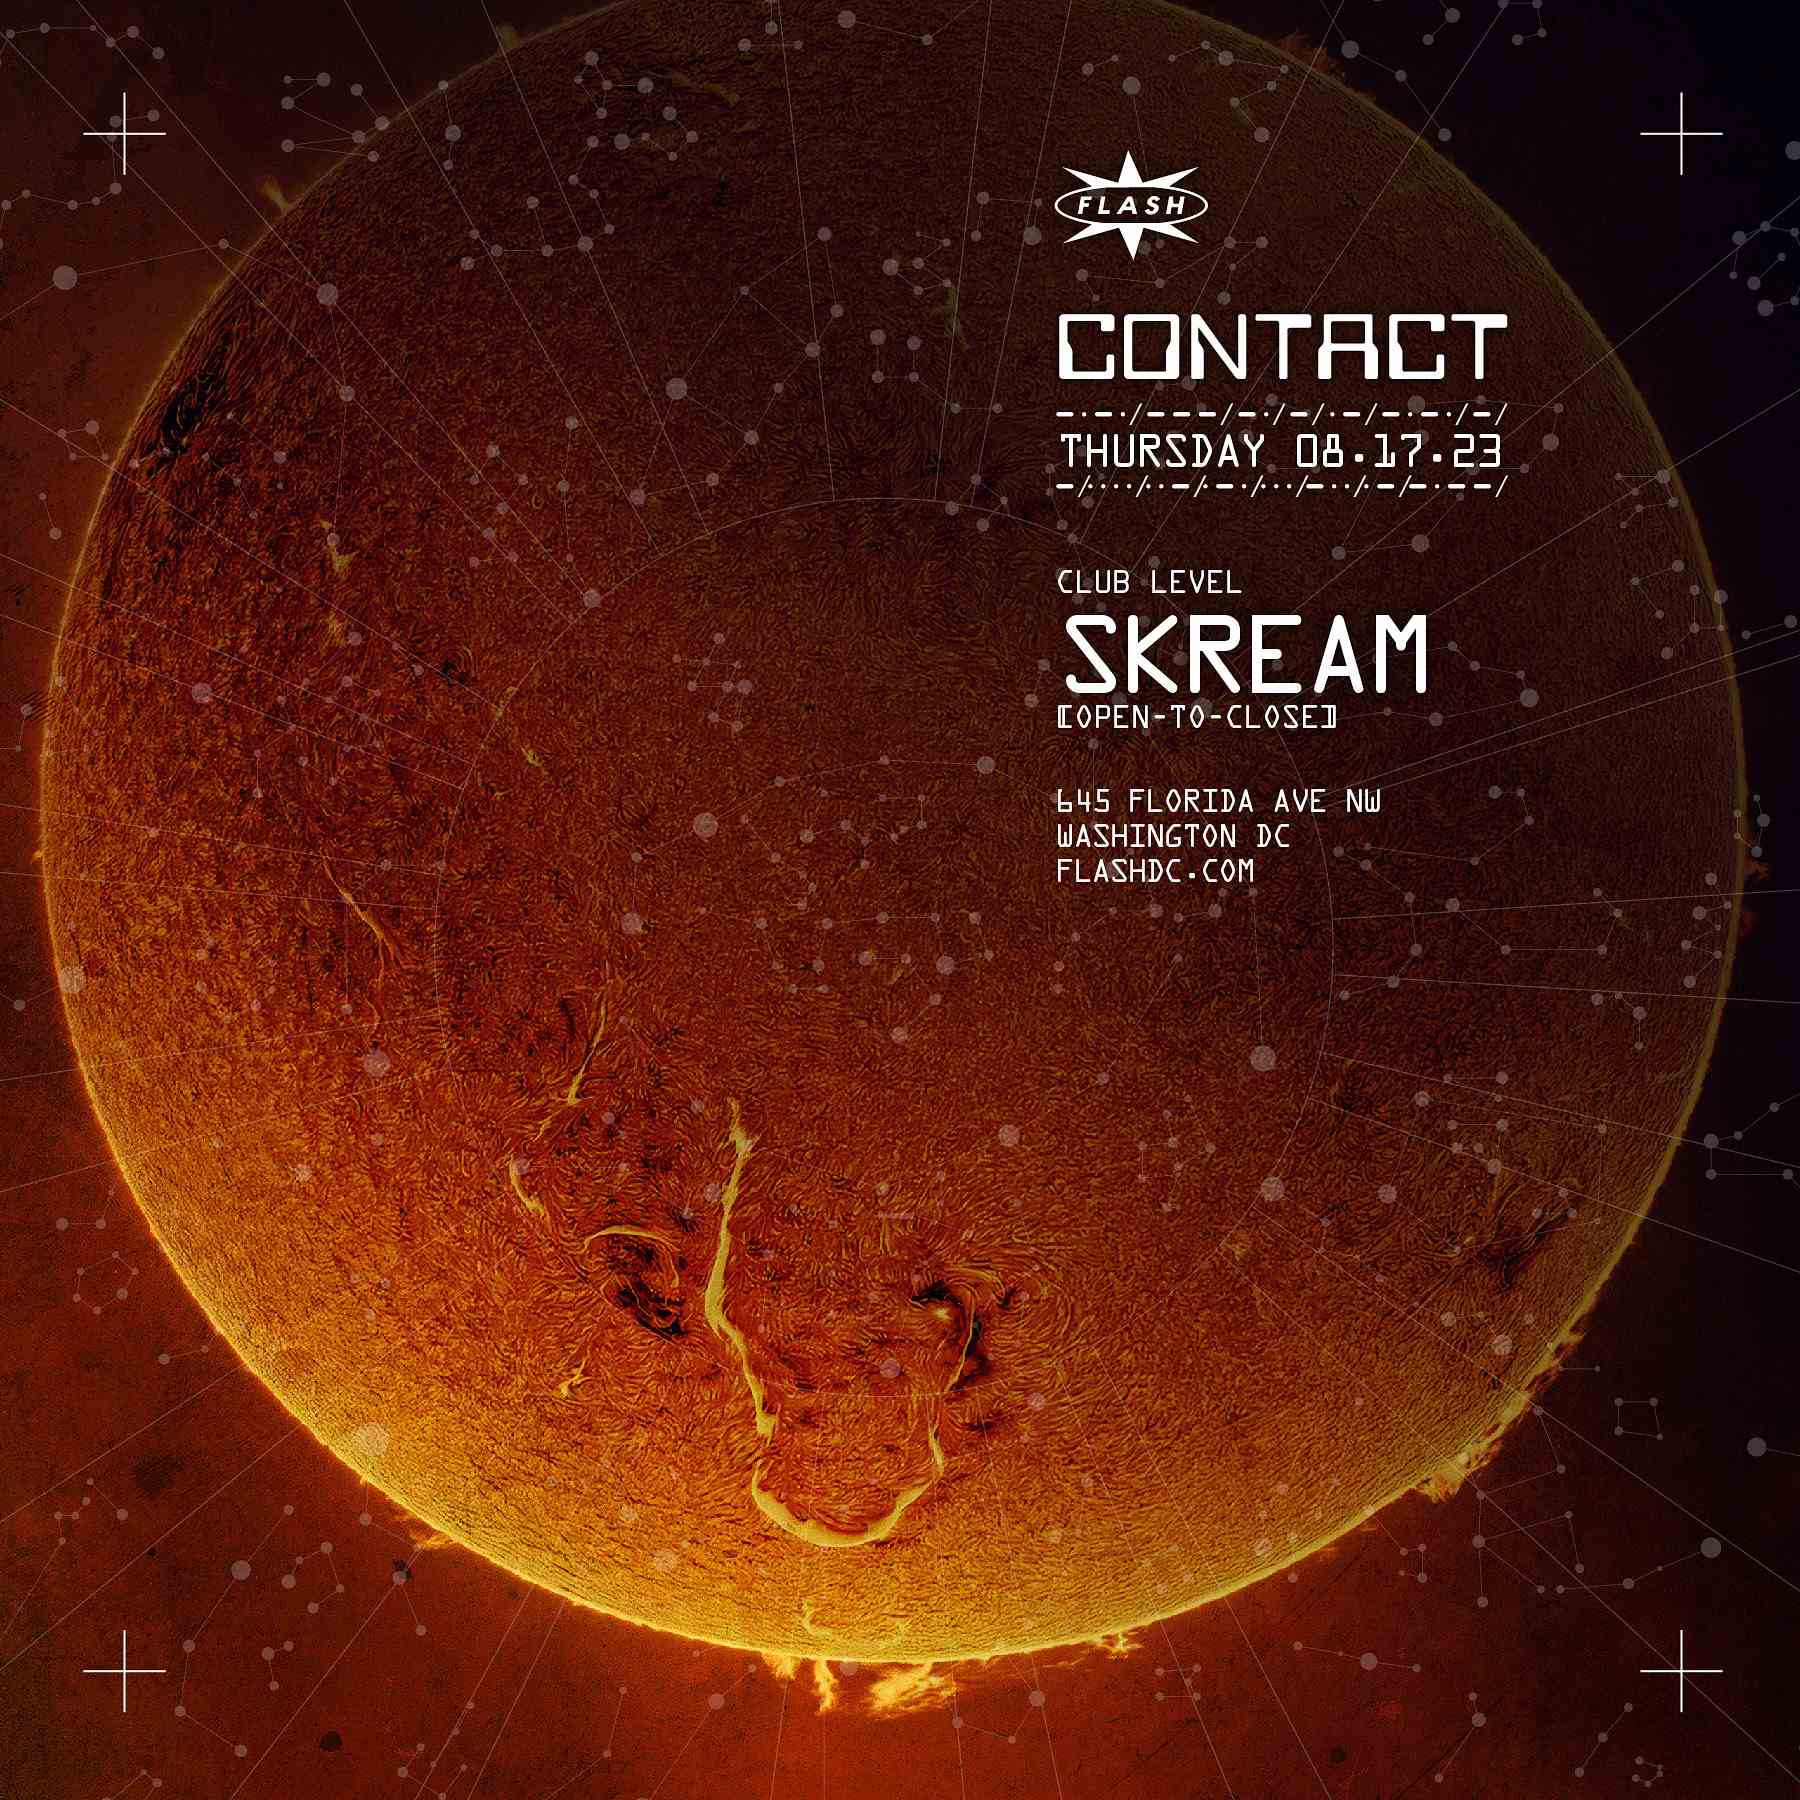 CONTACT: Skream [open-to-close] event flyer